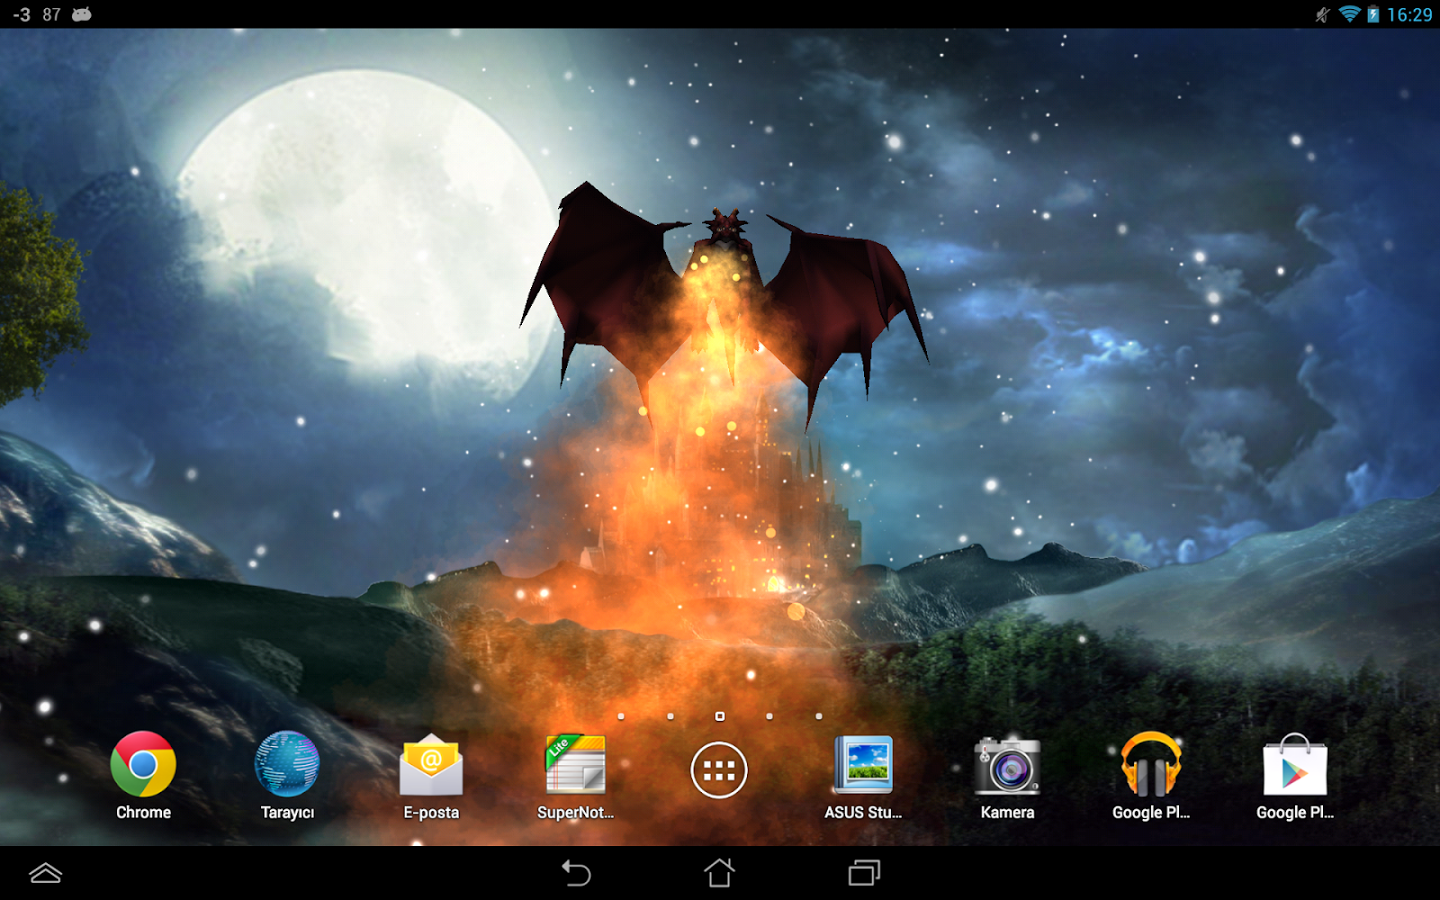 Dragon Live Wallpaper Android Apps On Google Play